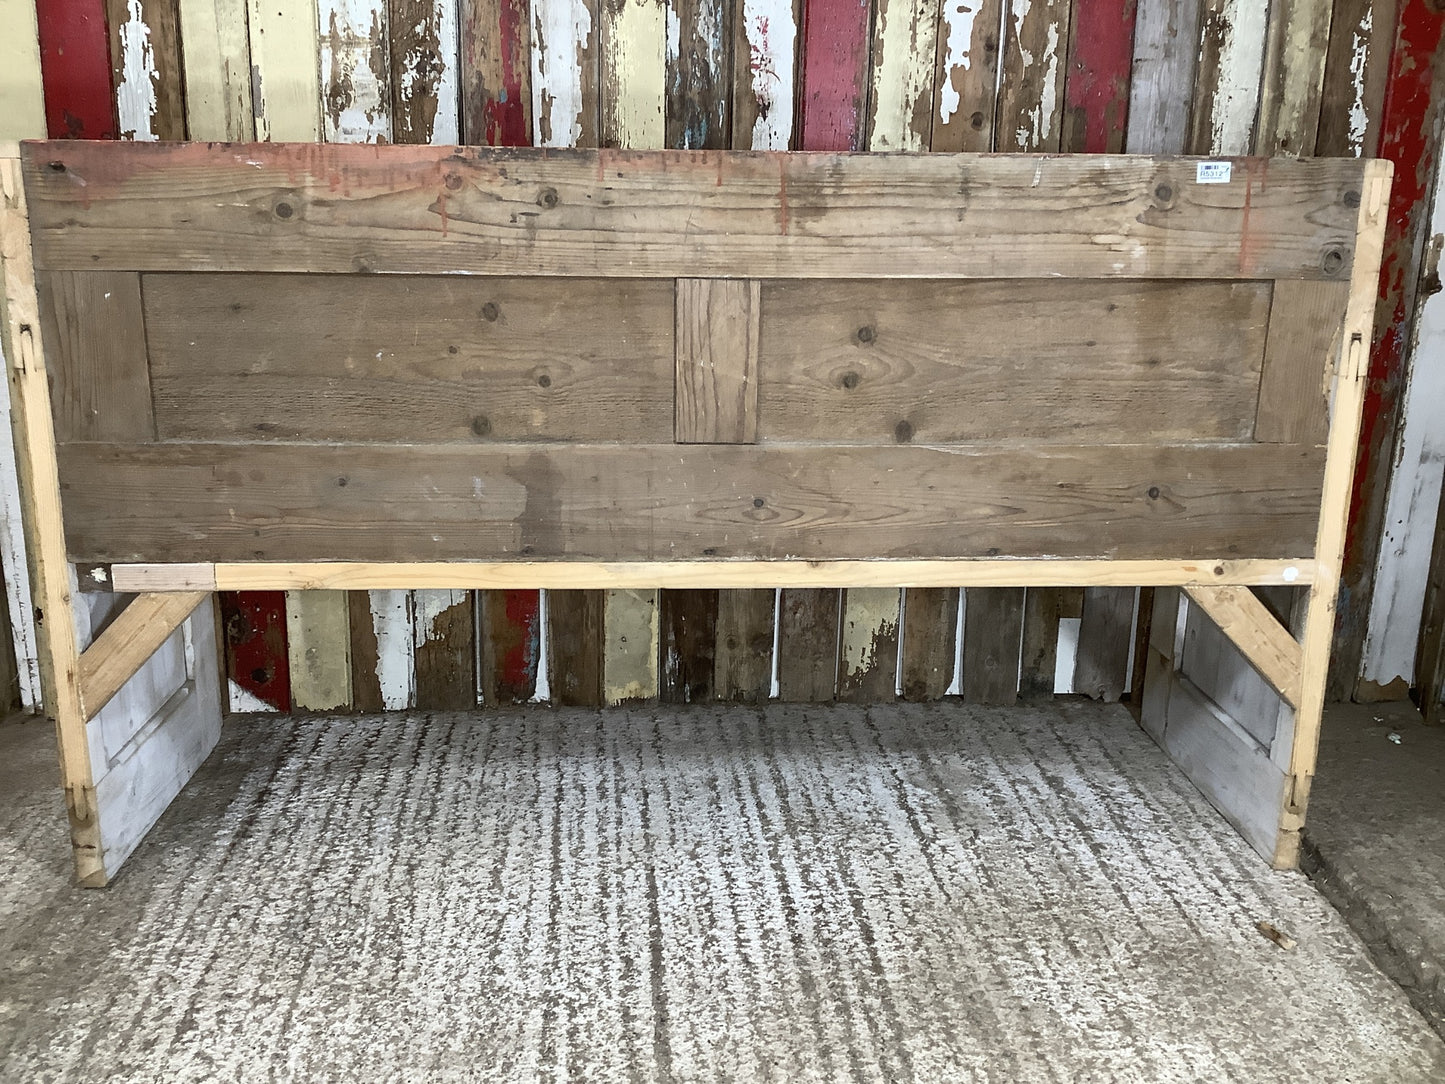 5'8" Old Rustic Hand Painted Pine Settle Pew Wooden